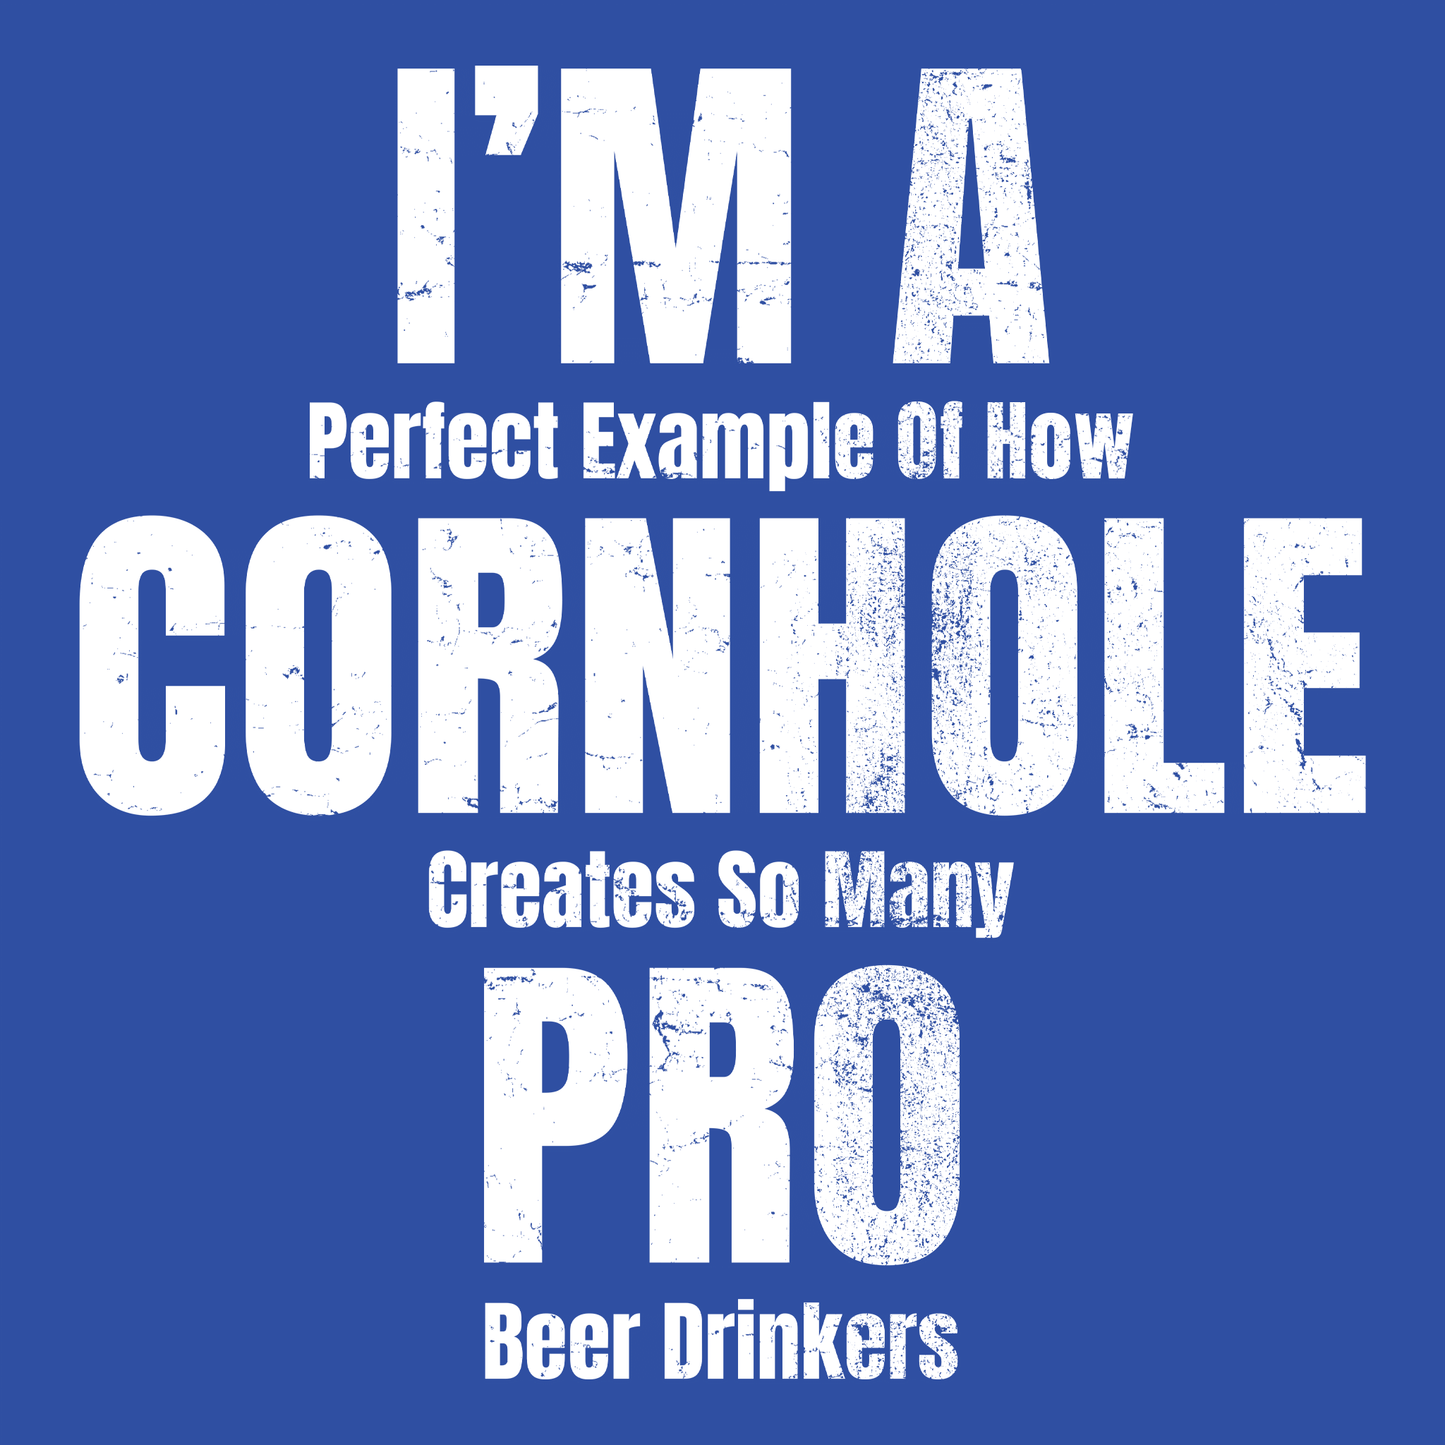 I'm A Perfect Example Of How Cornhole Creates Pro Beer Drinkers T-Shirt